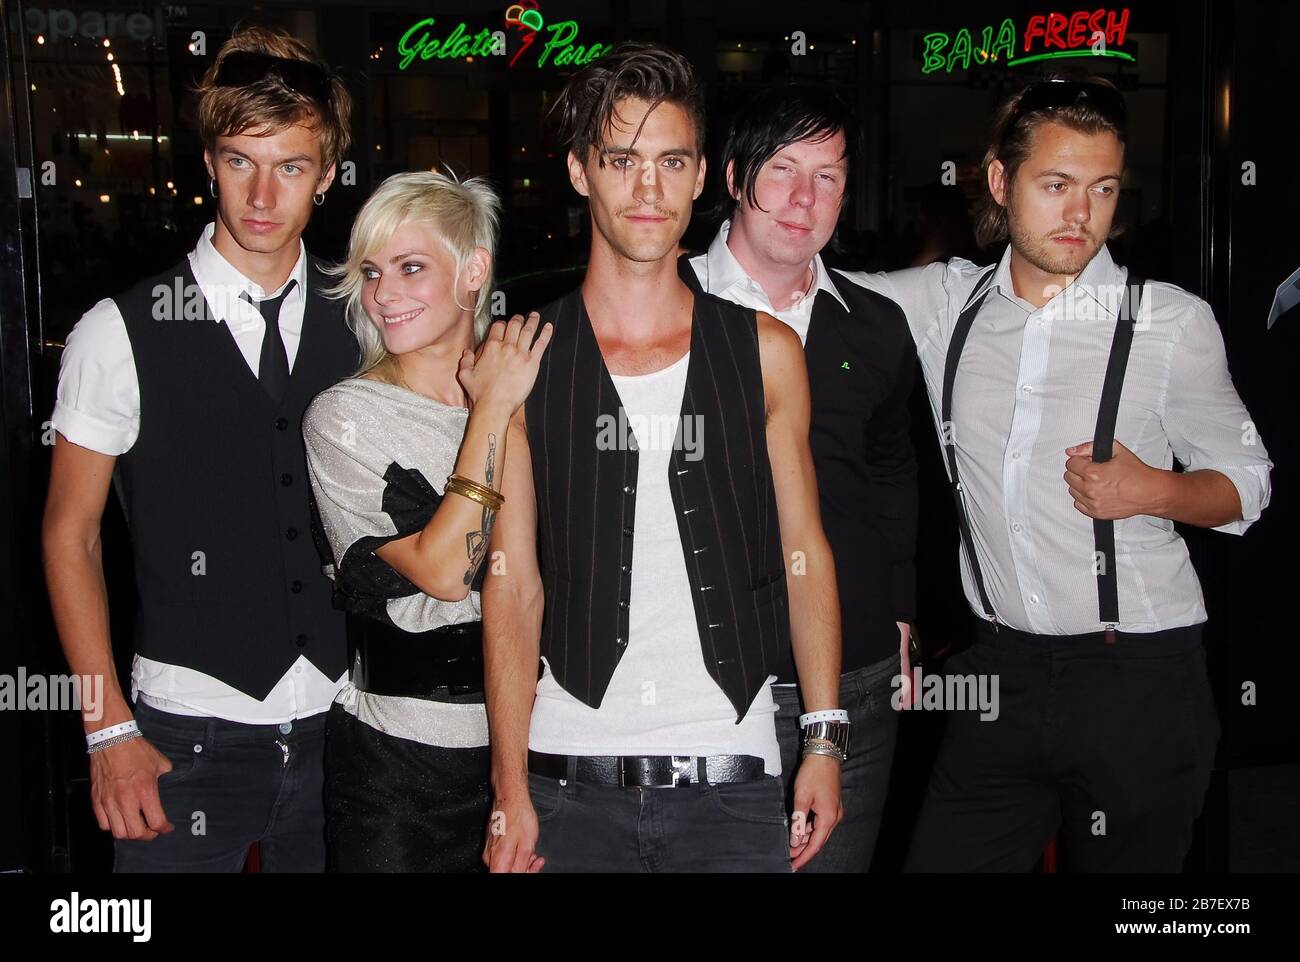 The Sounds at the Los Angeles Premiere of 'Snakes On A Plane' held at the Grauman's Chinese Theater in Hollywood, CA. The event took place on Thursday, August 17, 2006.  Photo by: SBM / PictureLux Stock Photo